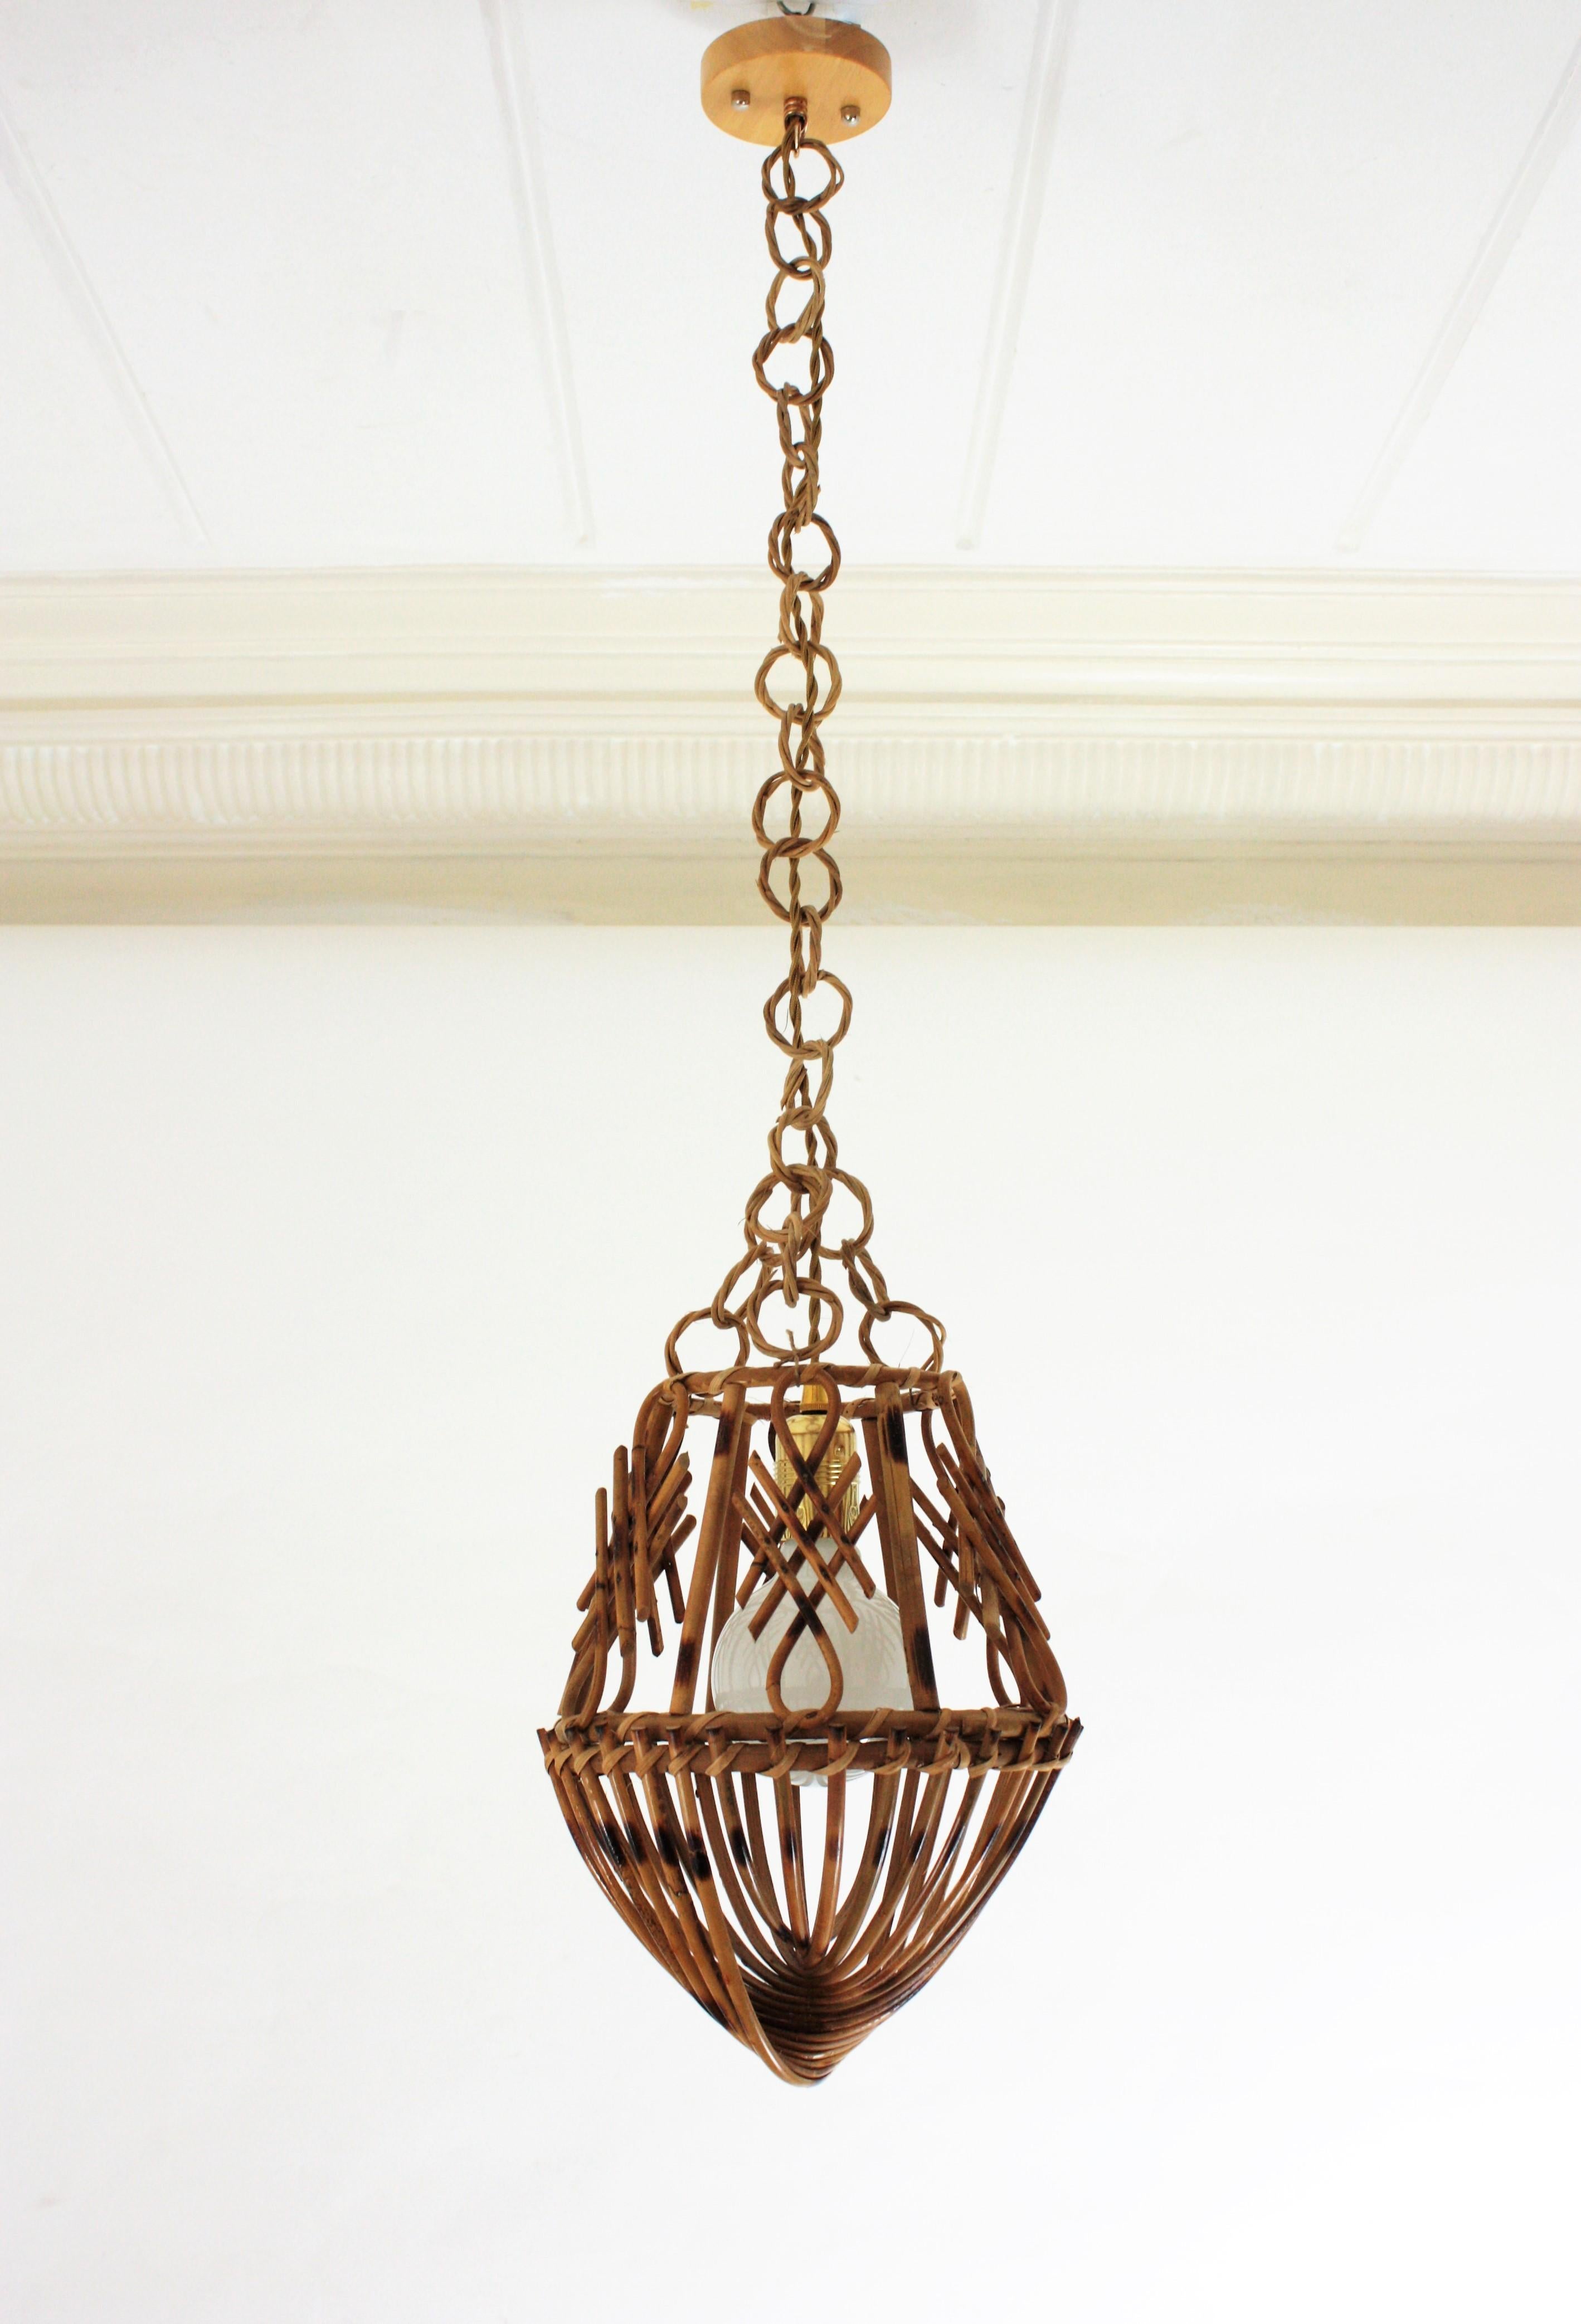 Hand-Crafted Rattan French Modernist Pendant Lamp or Lantern with Chinoiserie Accents